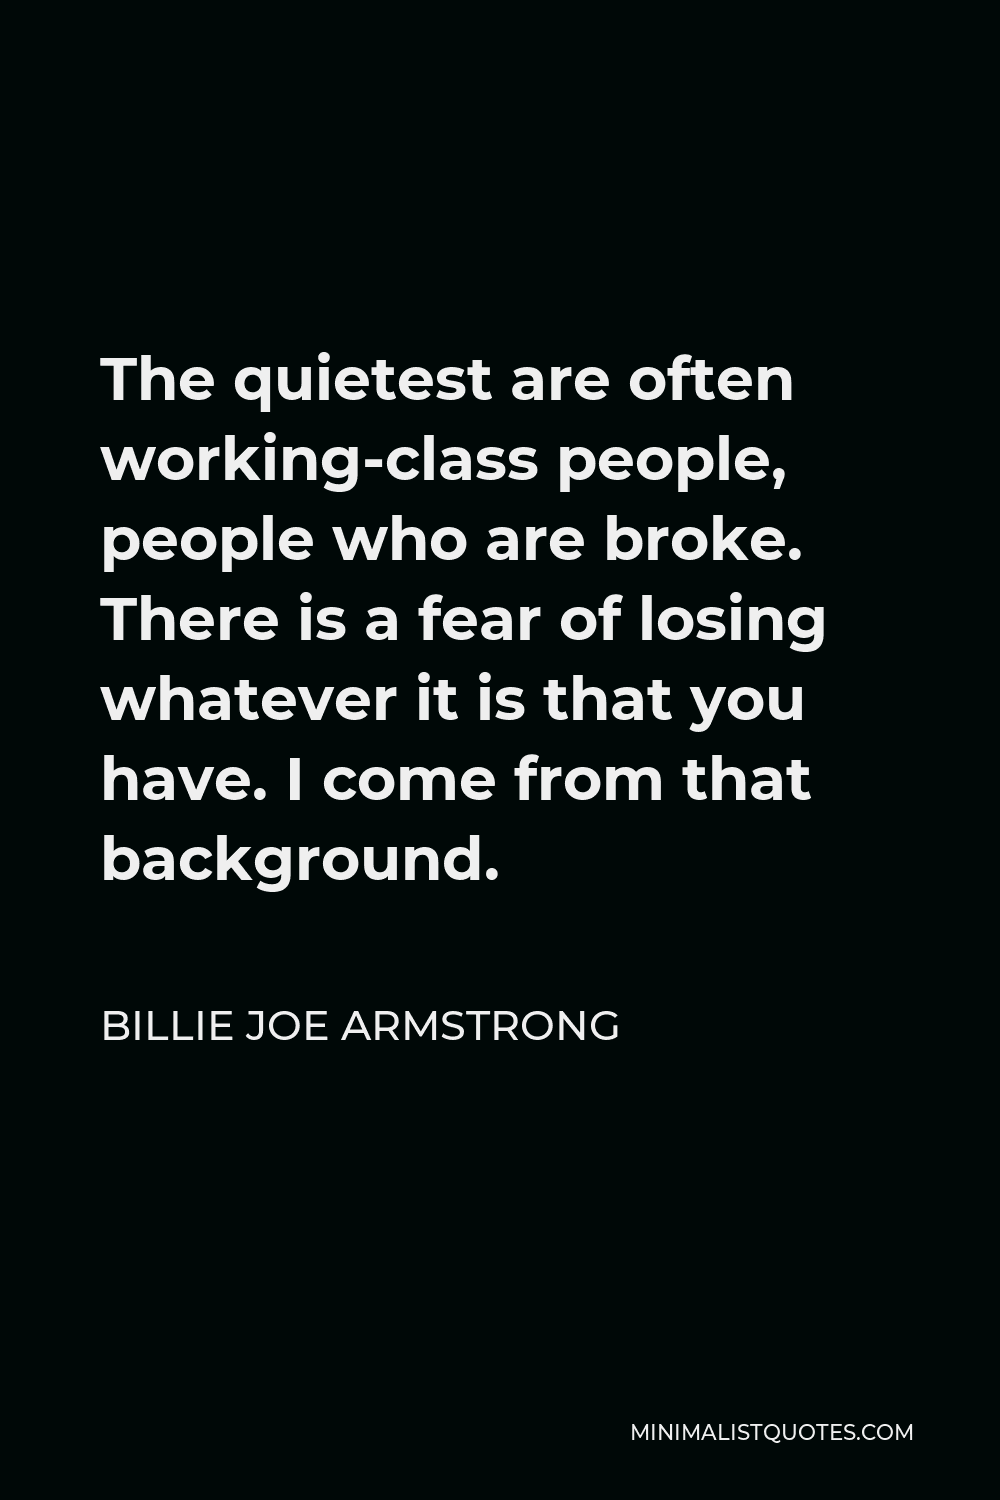 Billie Joe Armstrong Quote - The quietest are often working-class people, people who are broke. There is a fear of losing whatever it is that you have. I come from that background.